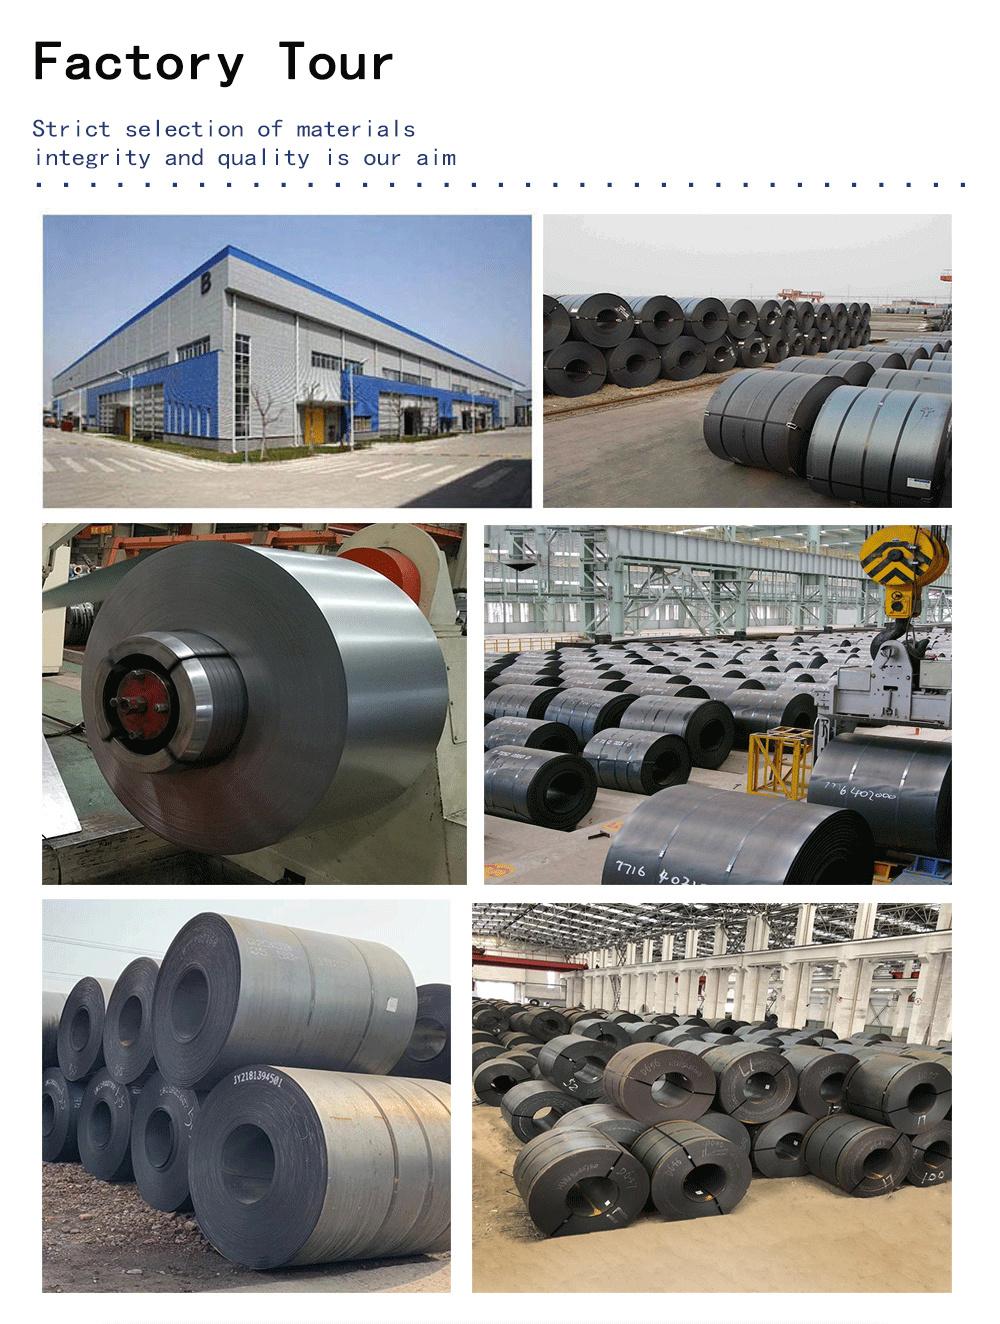 Professional ASTM 568 Cold Rolled Steel Coils ASTM A283 Grade C Carbon Steel Coil